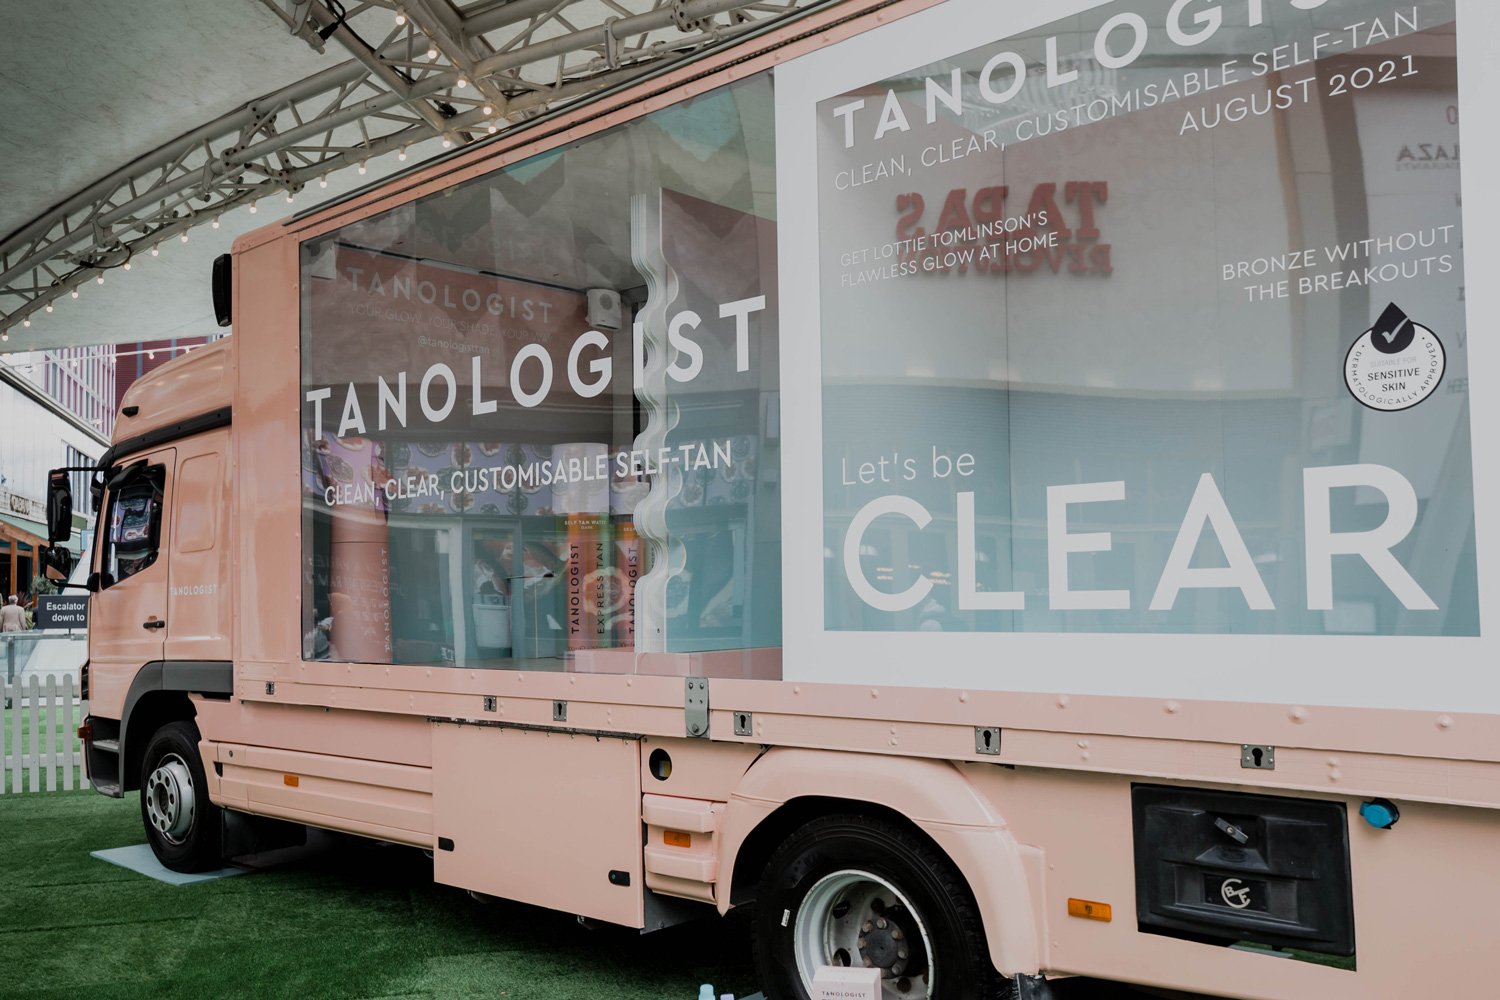 Tanologist - Let's be clear - Creative Experiential Agency